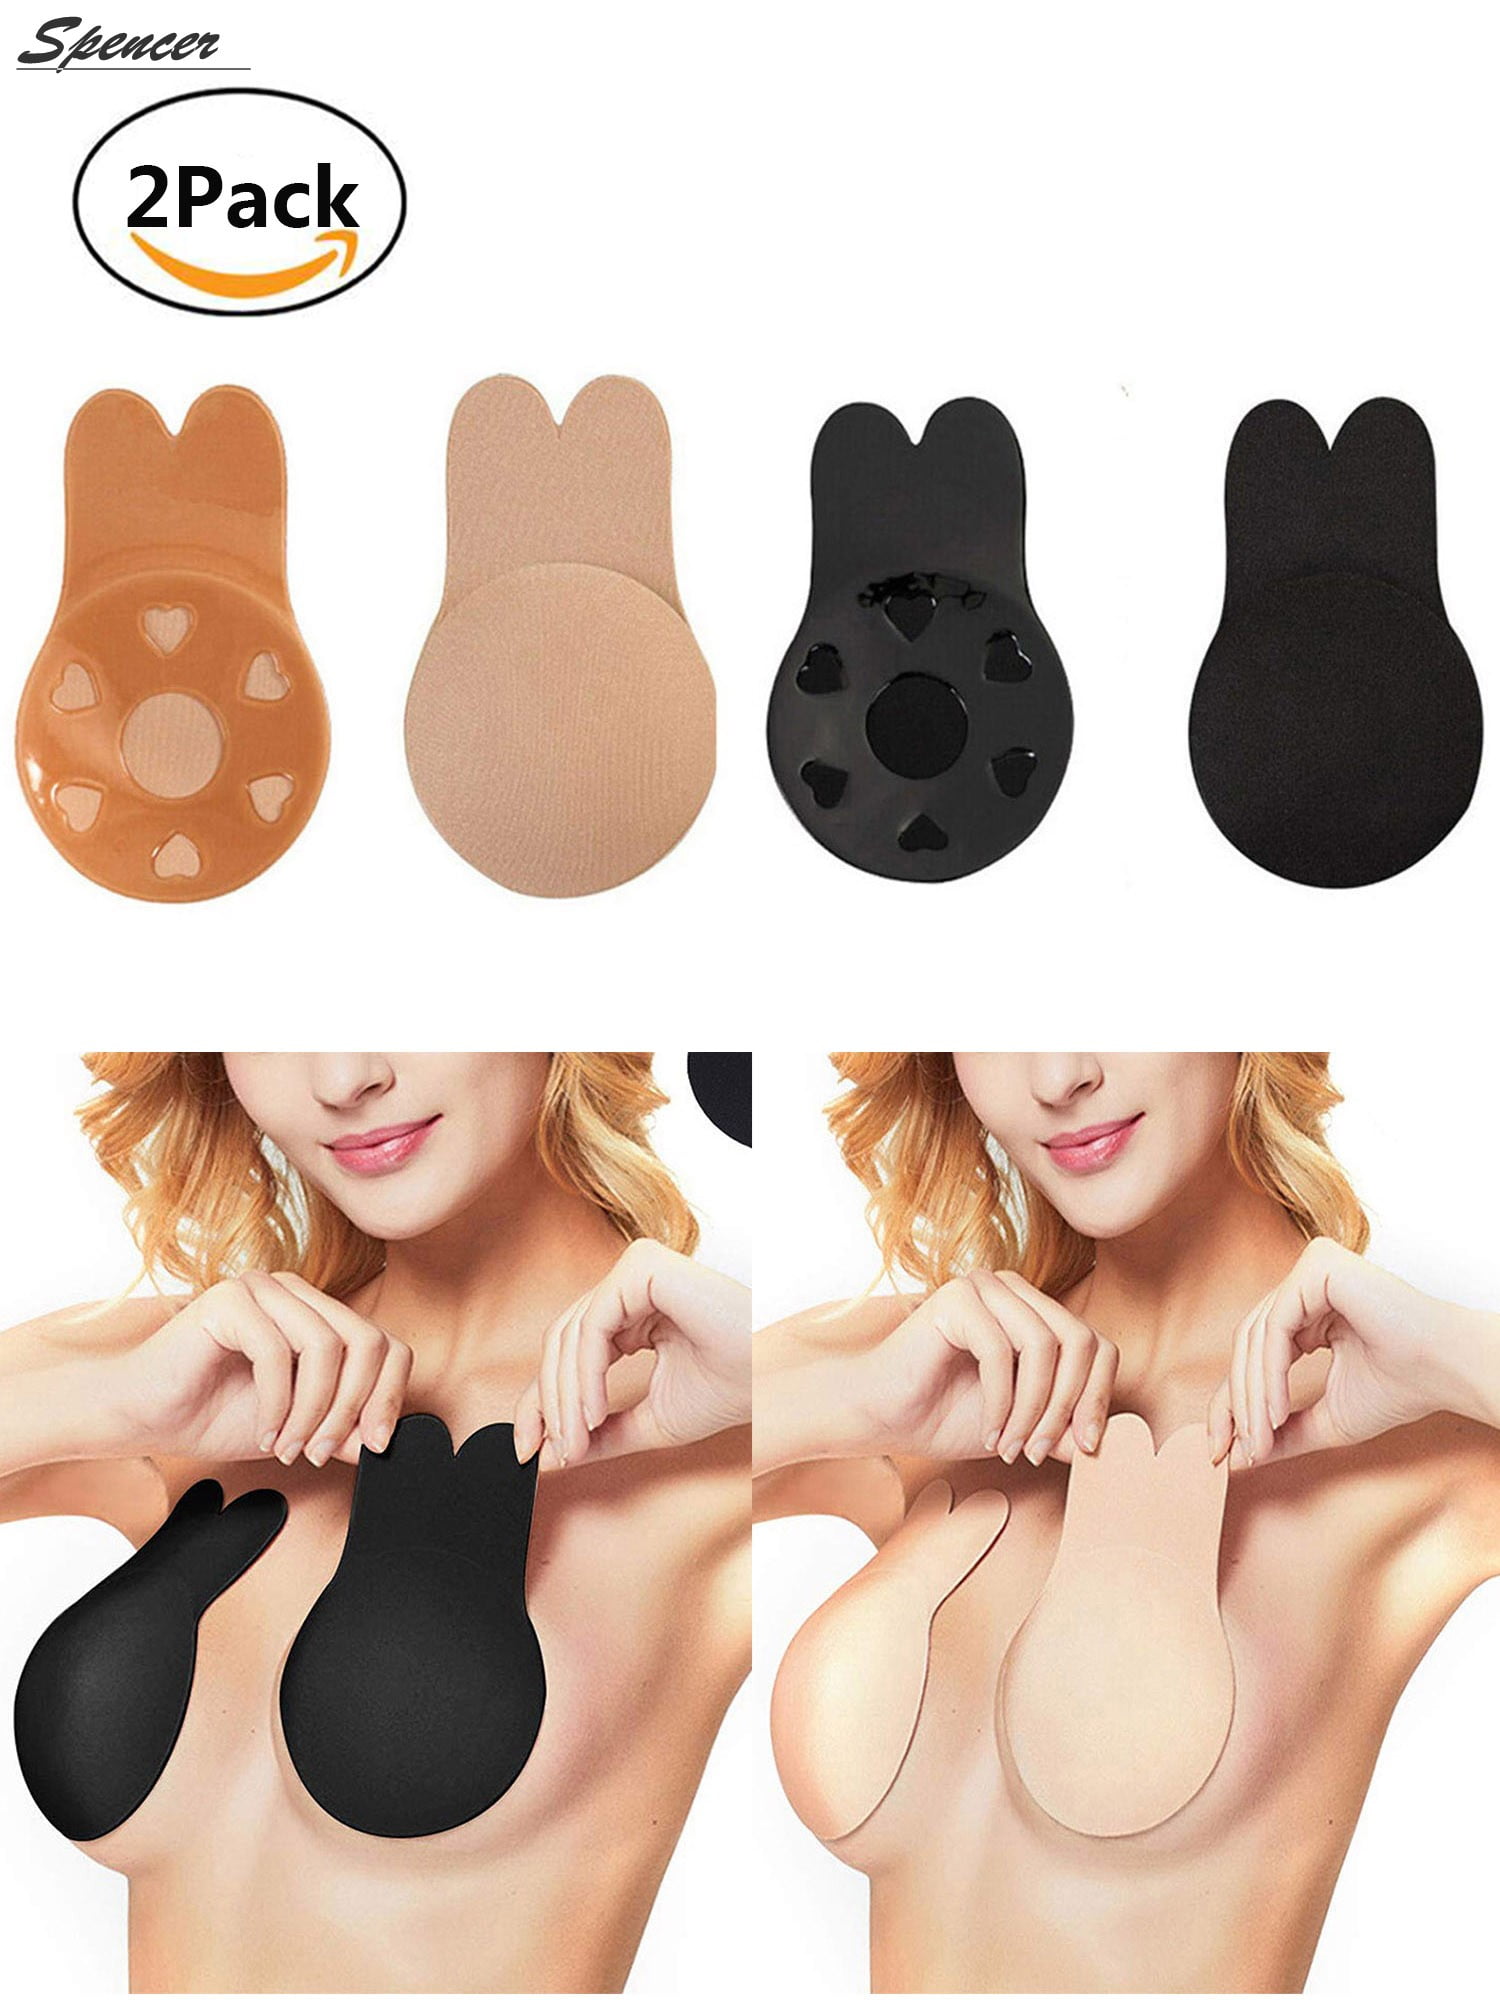 Spencer 2Pack Women's Reusable Self-Adhesive Invisible Bra Backless  Strapless Push-up Sticky Breast Petals Lift Nipplecovers with Drawstring  Flower